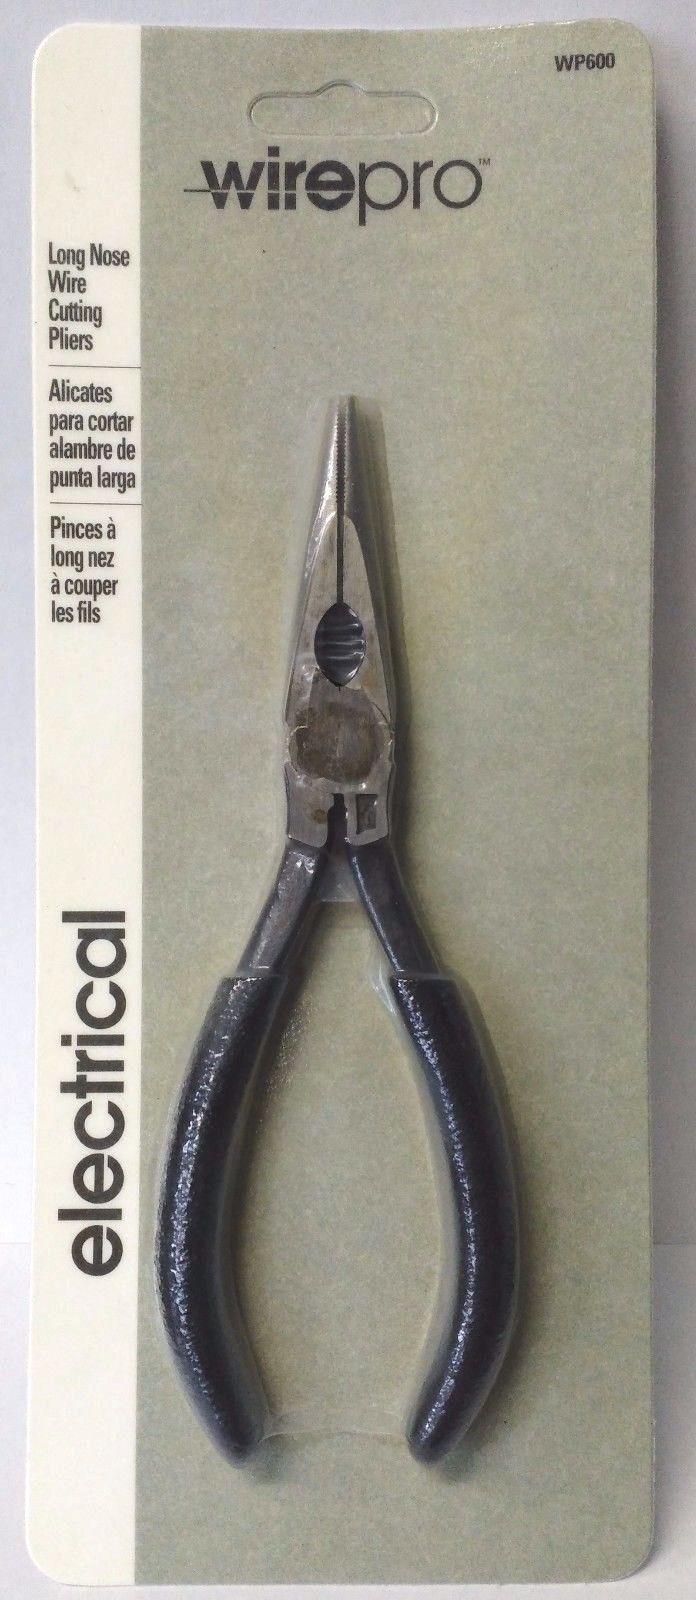 WirePro by Klein WP600 6" Long Nose Wire Cutting Pliers USA